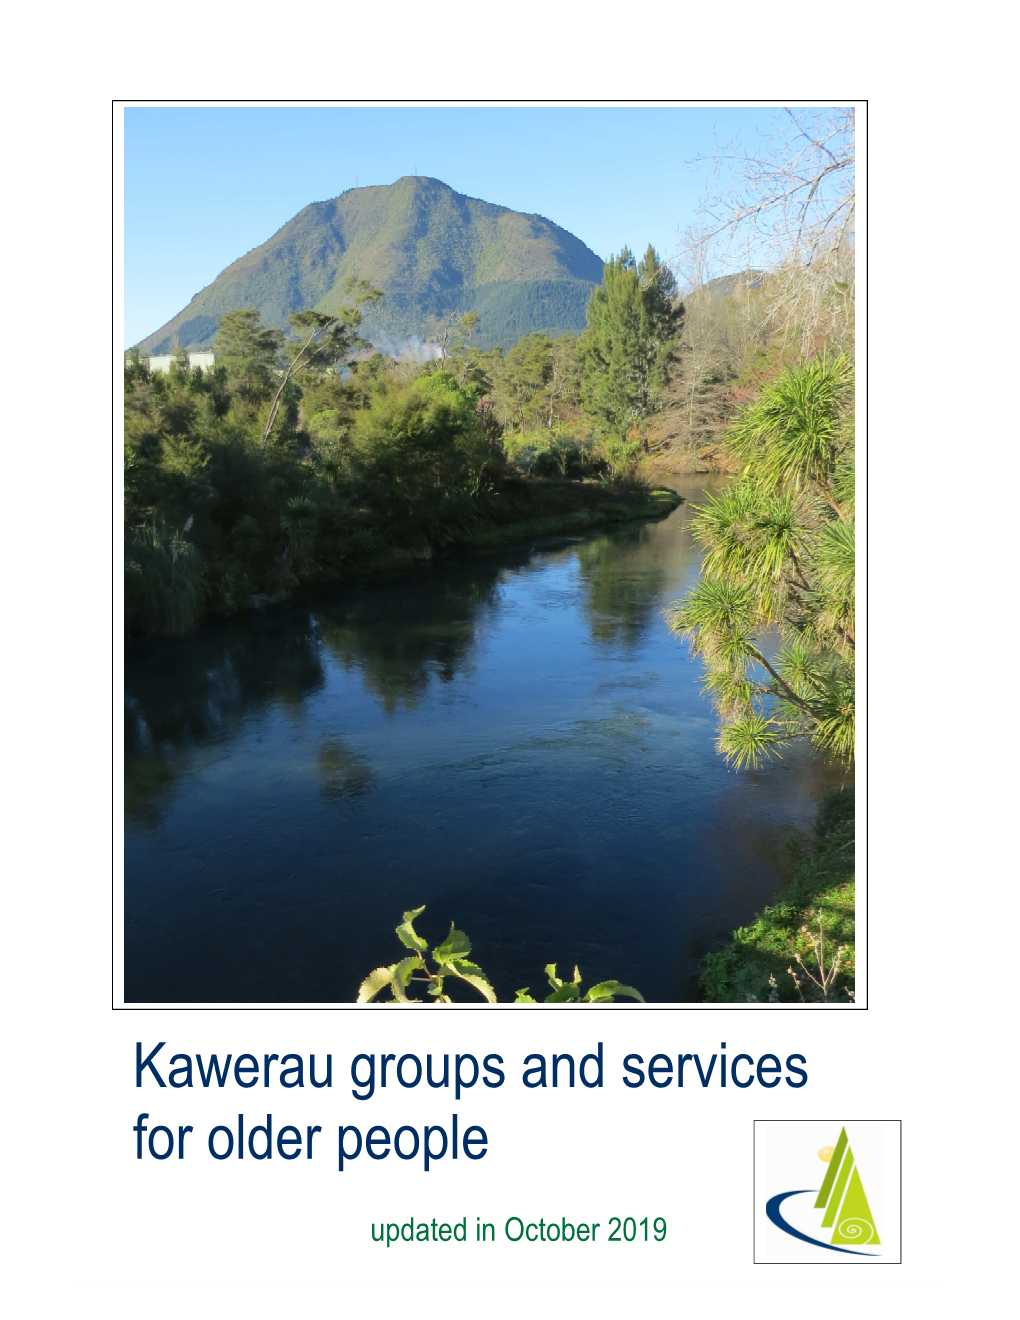 Kawerau Groups and Services for Older People